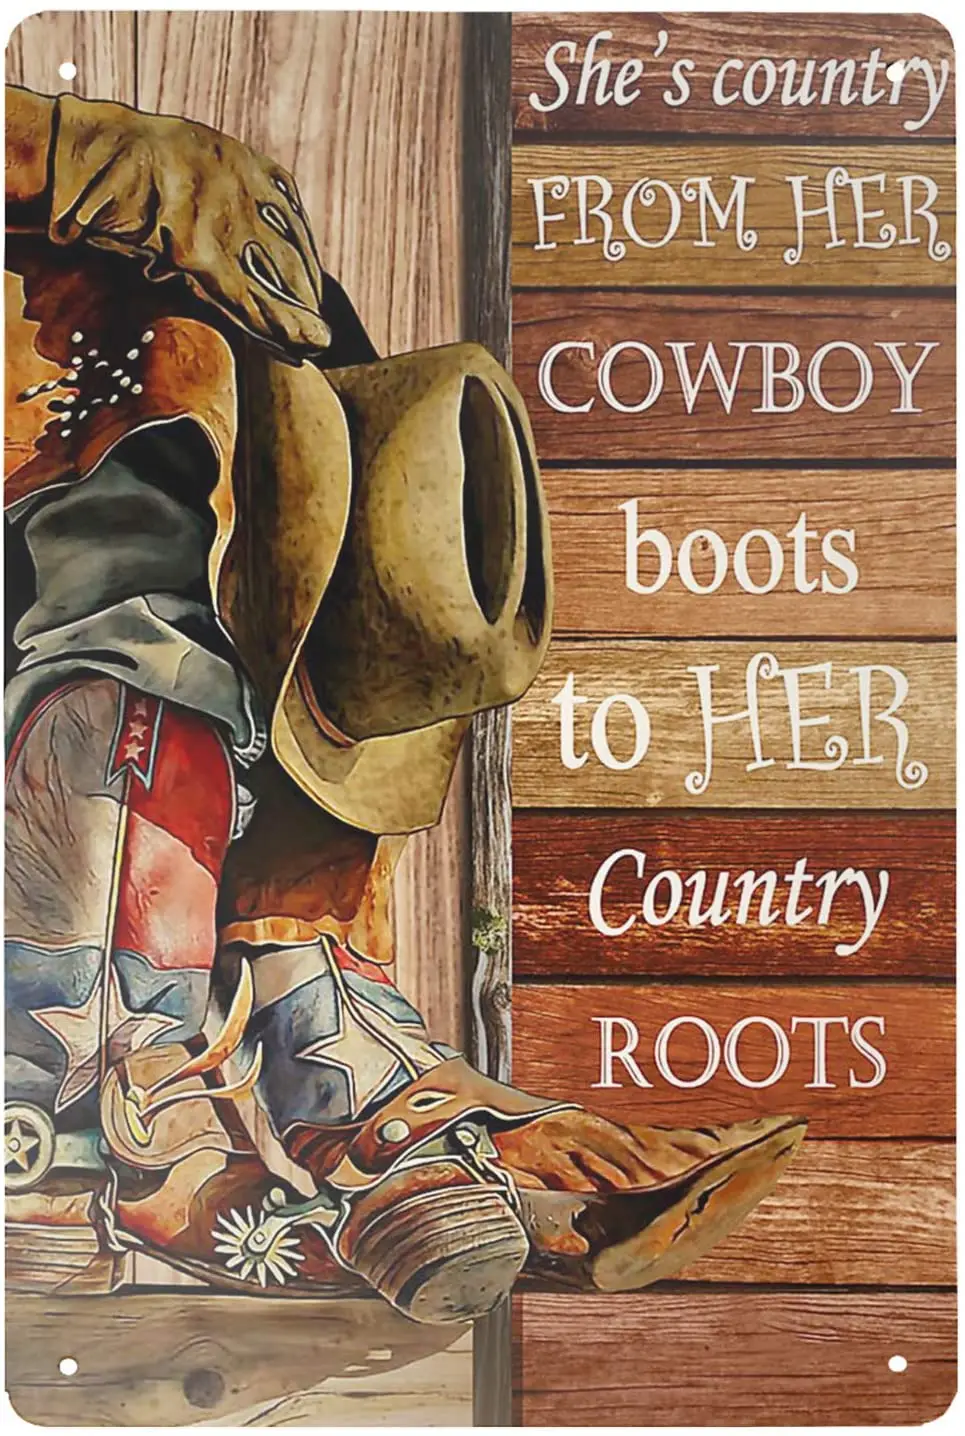 

Texas Cowboy Clothing She Is The Country Retro Garage Bar Coffee Shop Home Wall Decoration From Her Cowboy Tank Logo